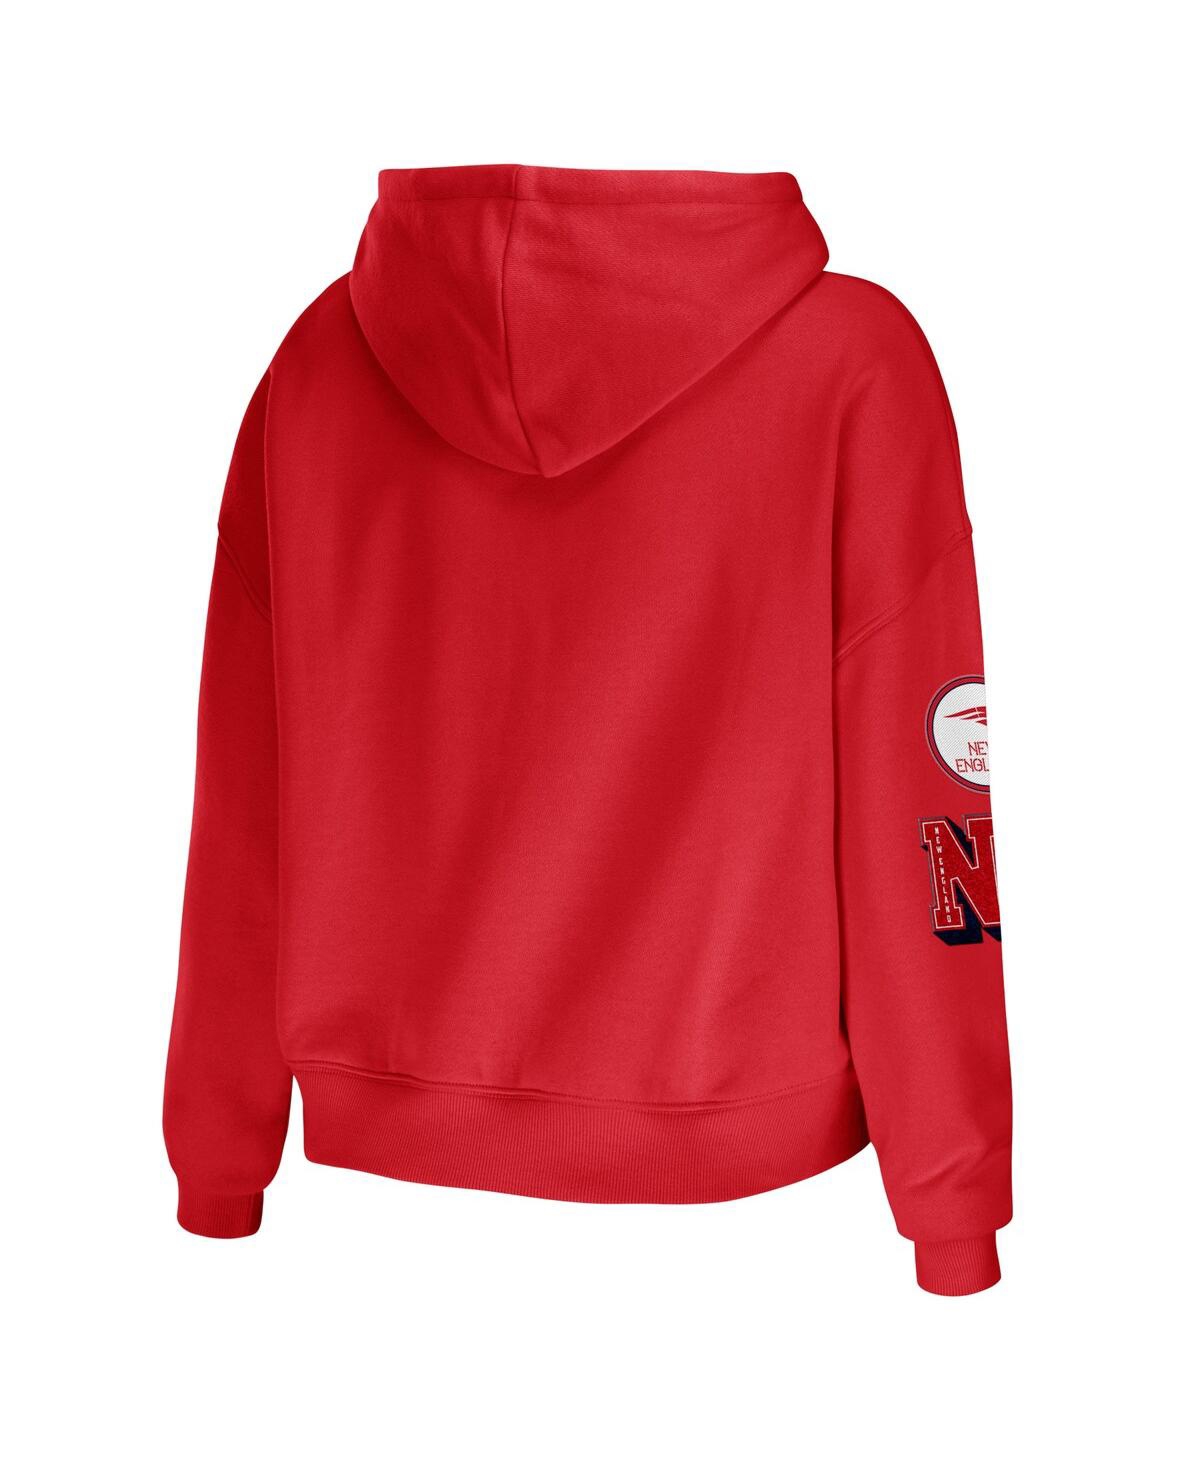 Shop Wear By Erin Andrews Women's  Red New England Patriots Plus Size Modest Cropped Pullover Hoodie